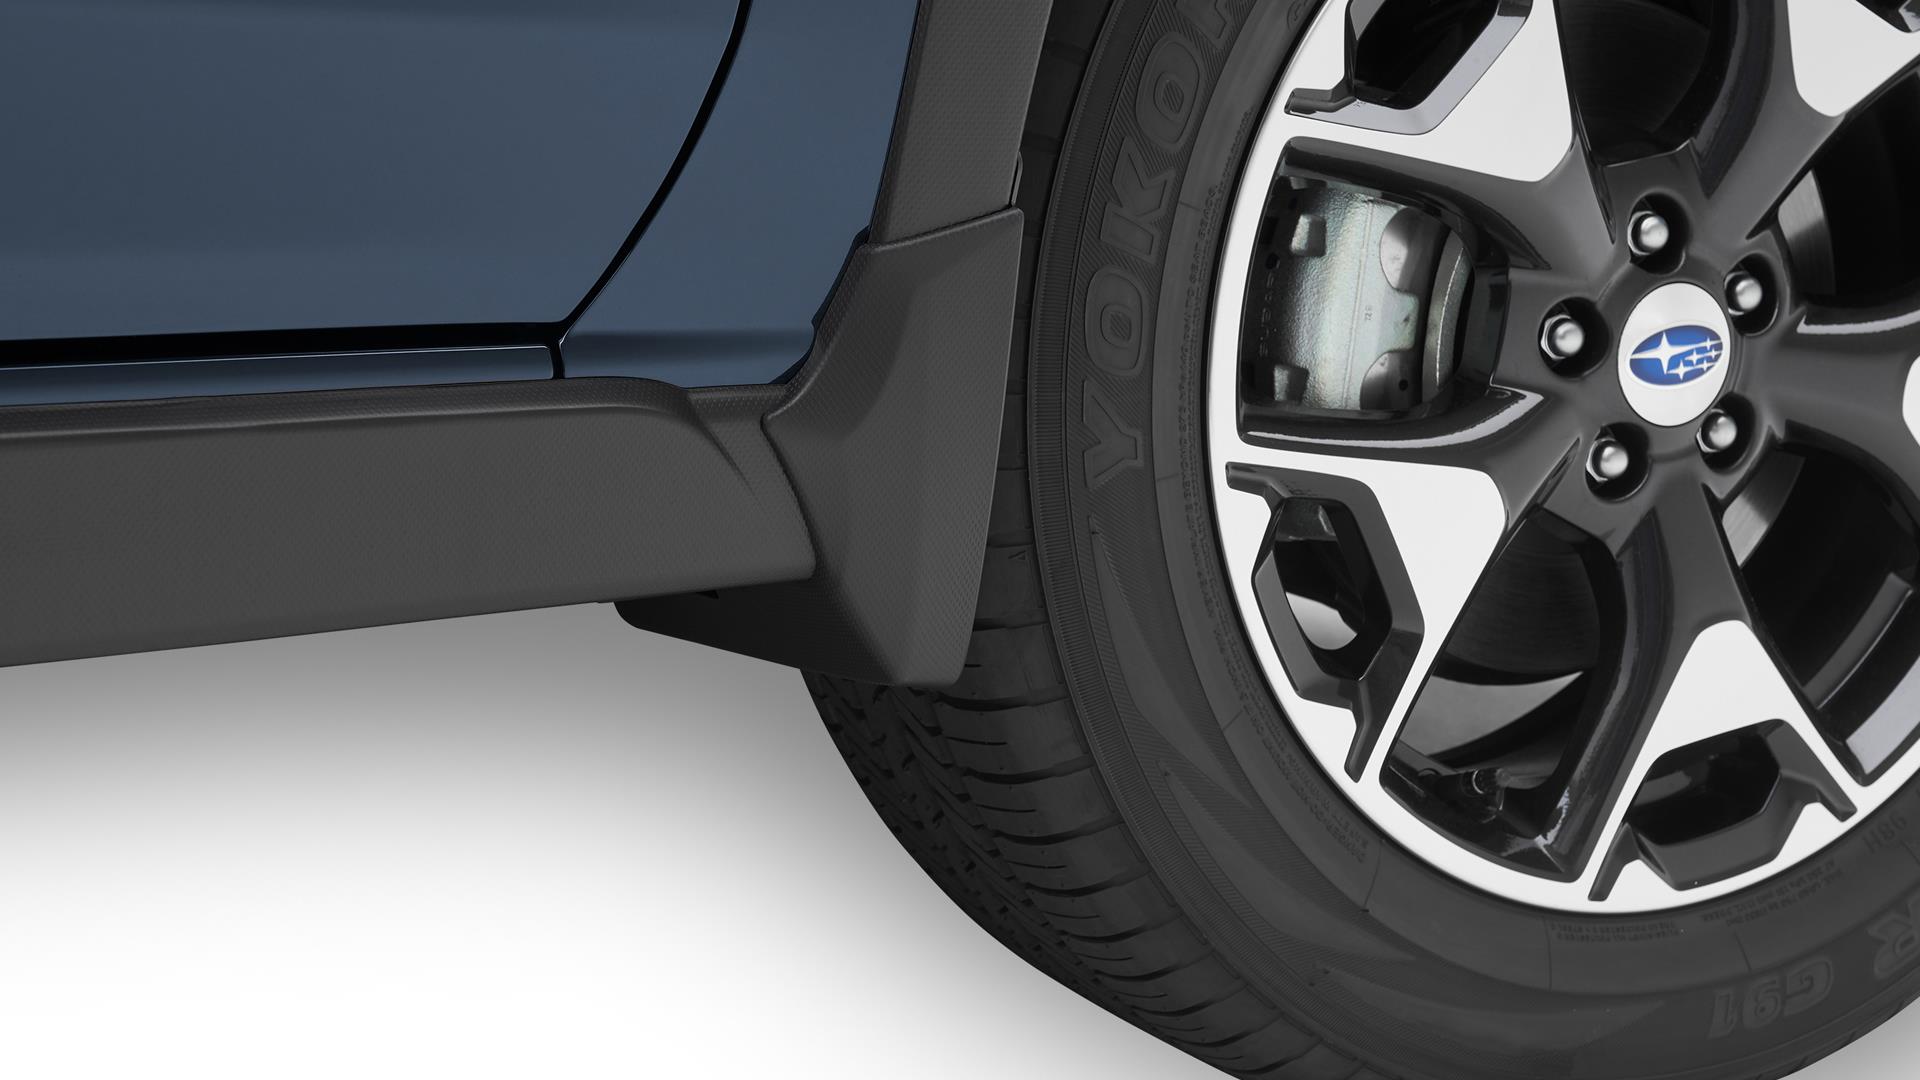 Image of Splash Guard. Helps protect vehicle. image for your Subaru